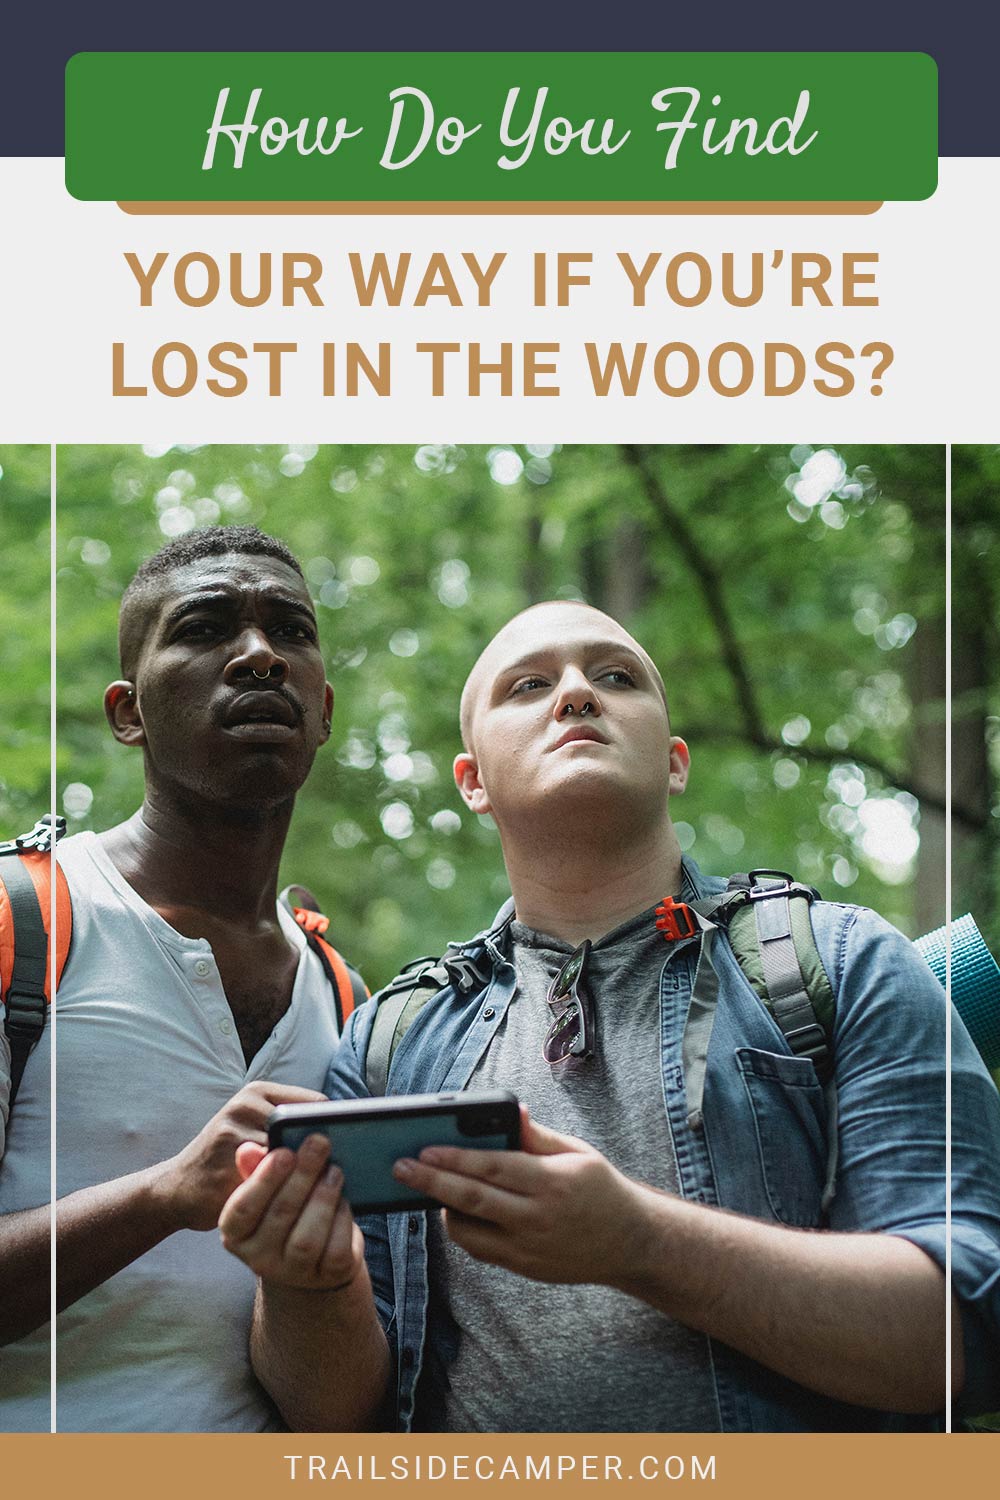 How Do You Find Your Way if You’re Lost in the Woods?